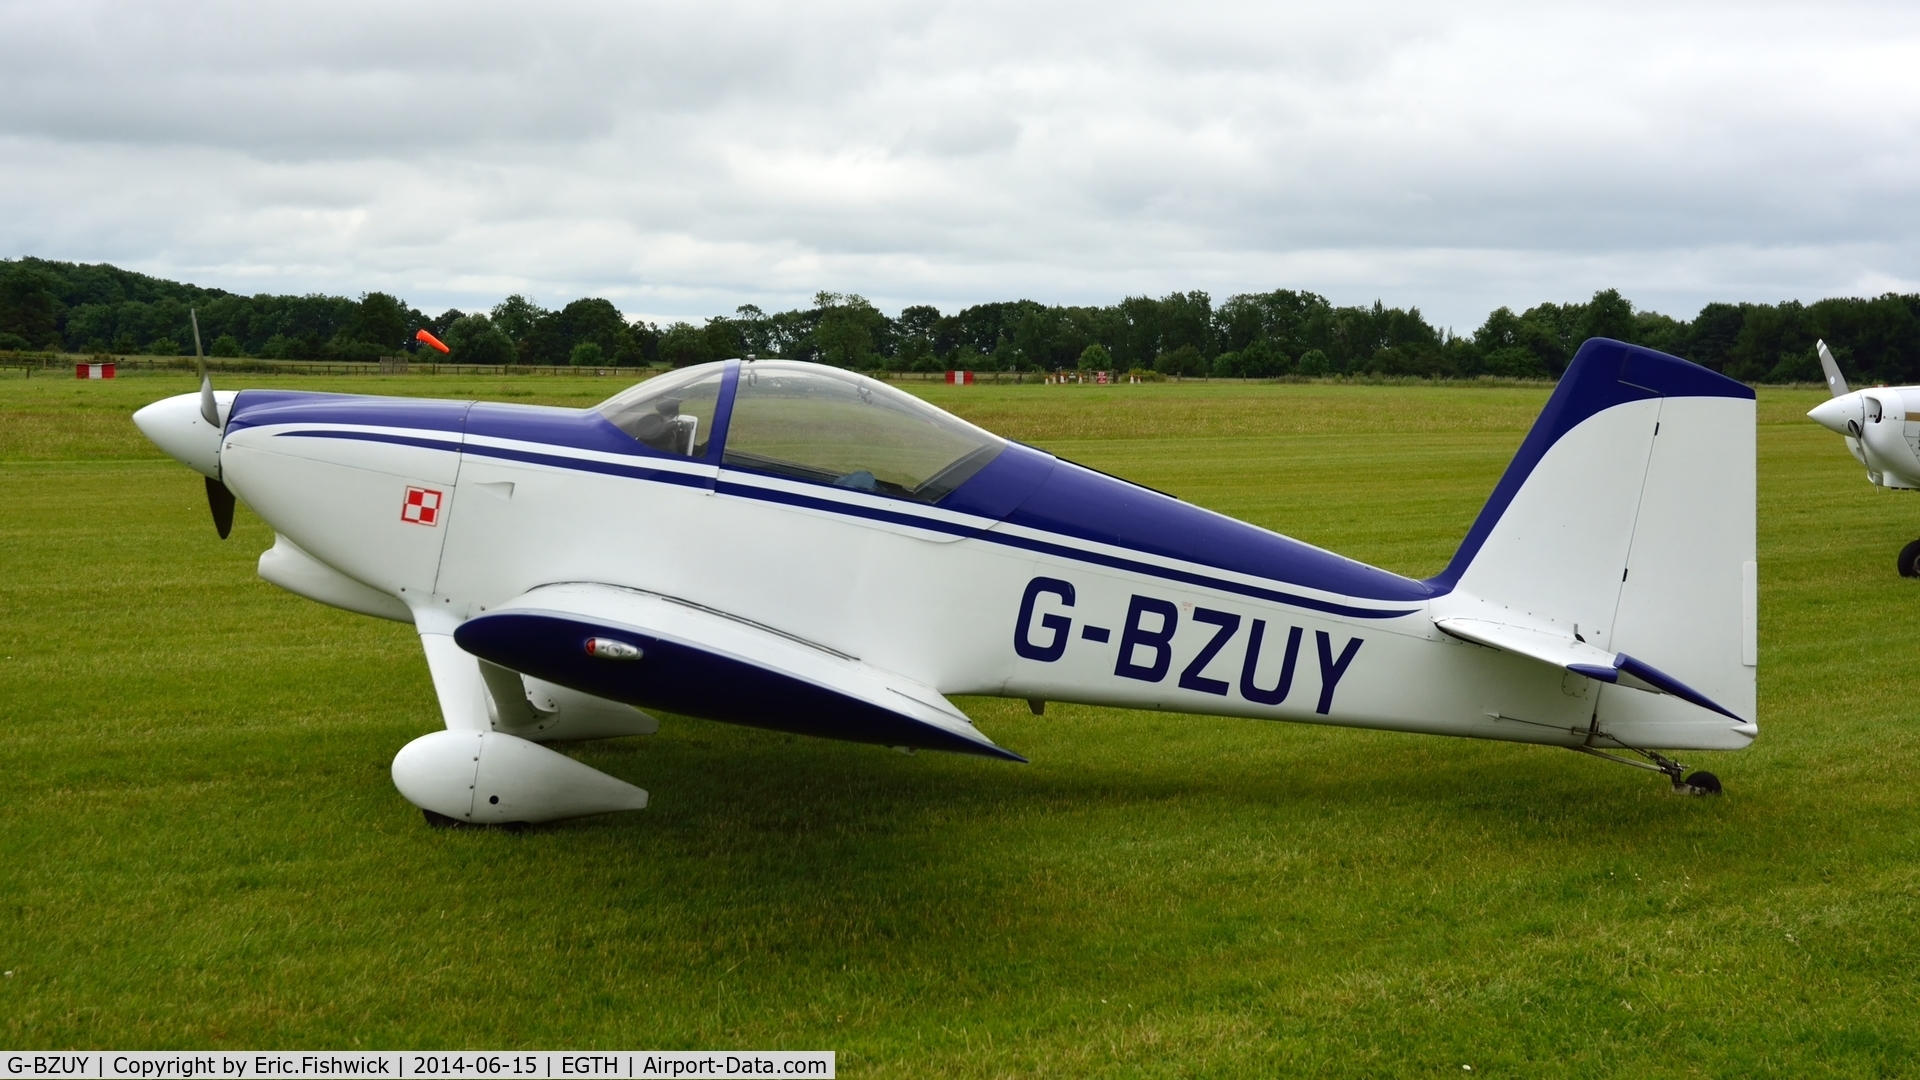 G-BZUY, 2001 Vans RV-6 C/N PFA 181A-13471, 1. G-BZUY at The Shuttleworth Collection Airshow - featuring LAA 'party in the park'